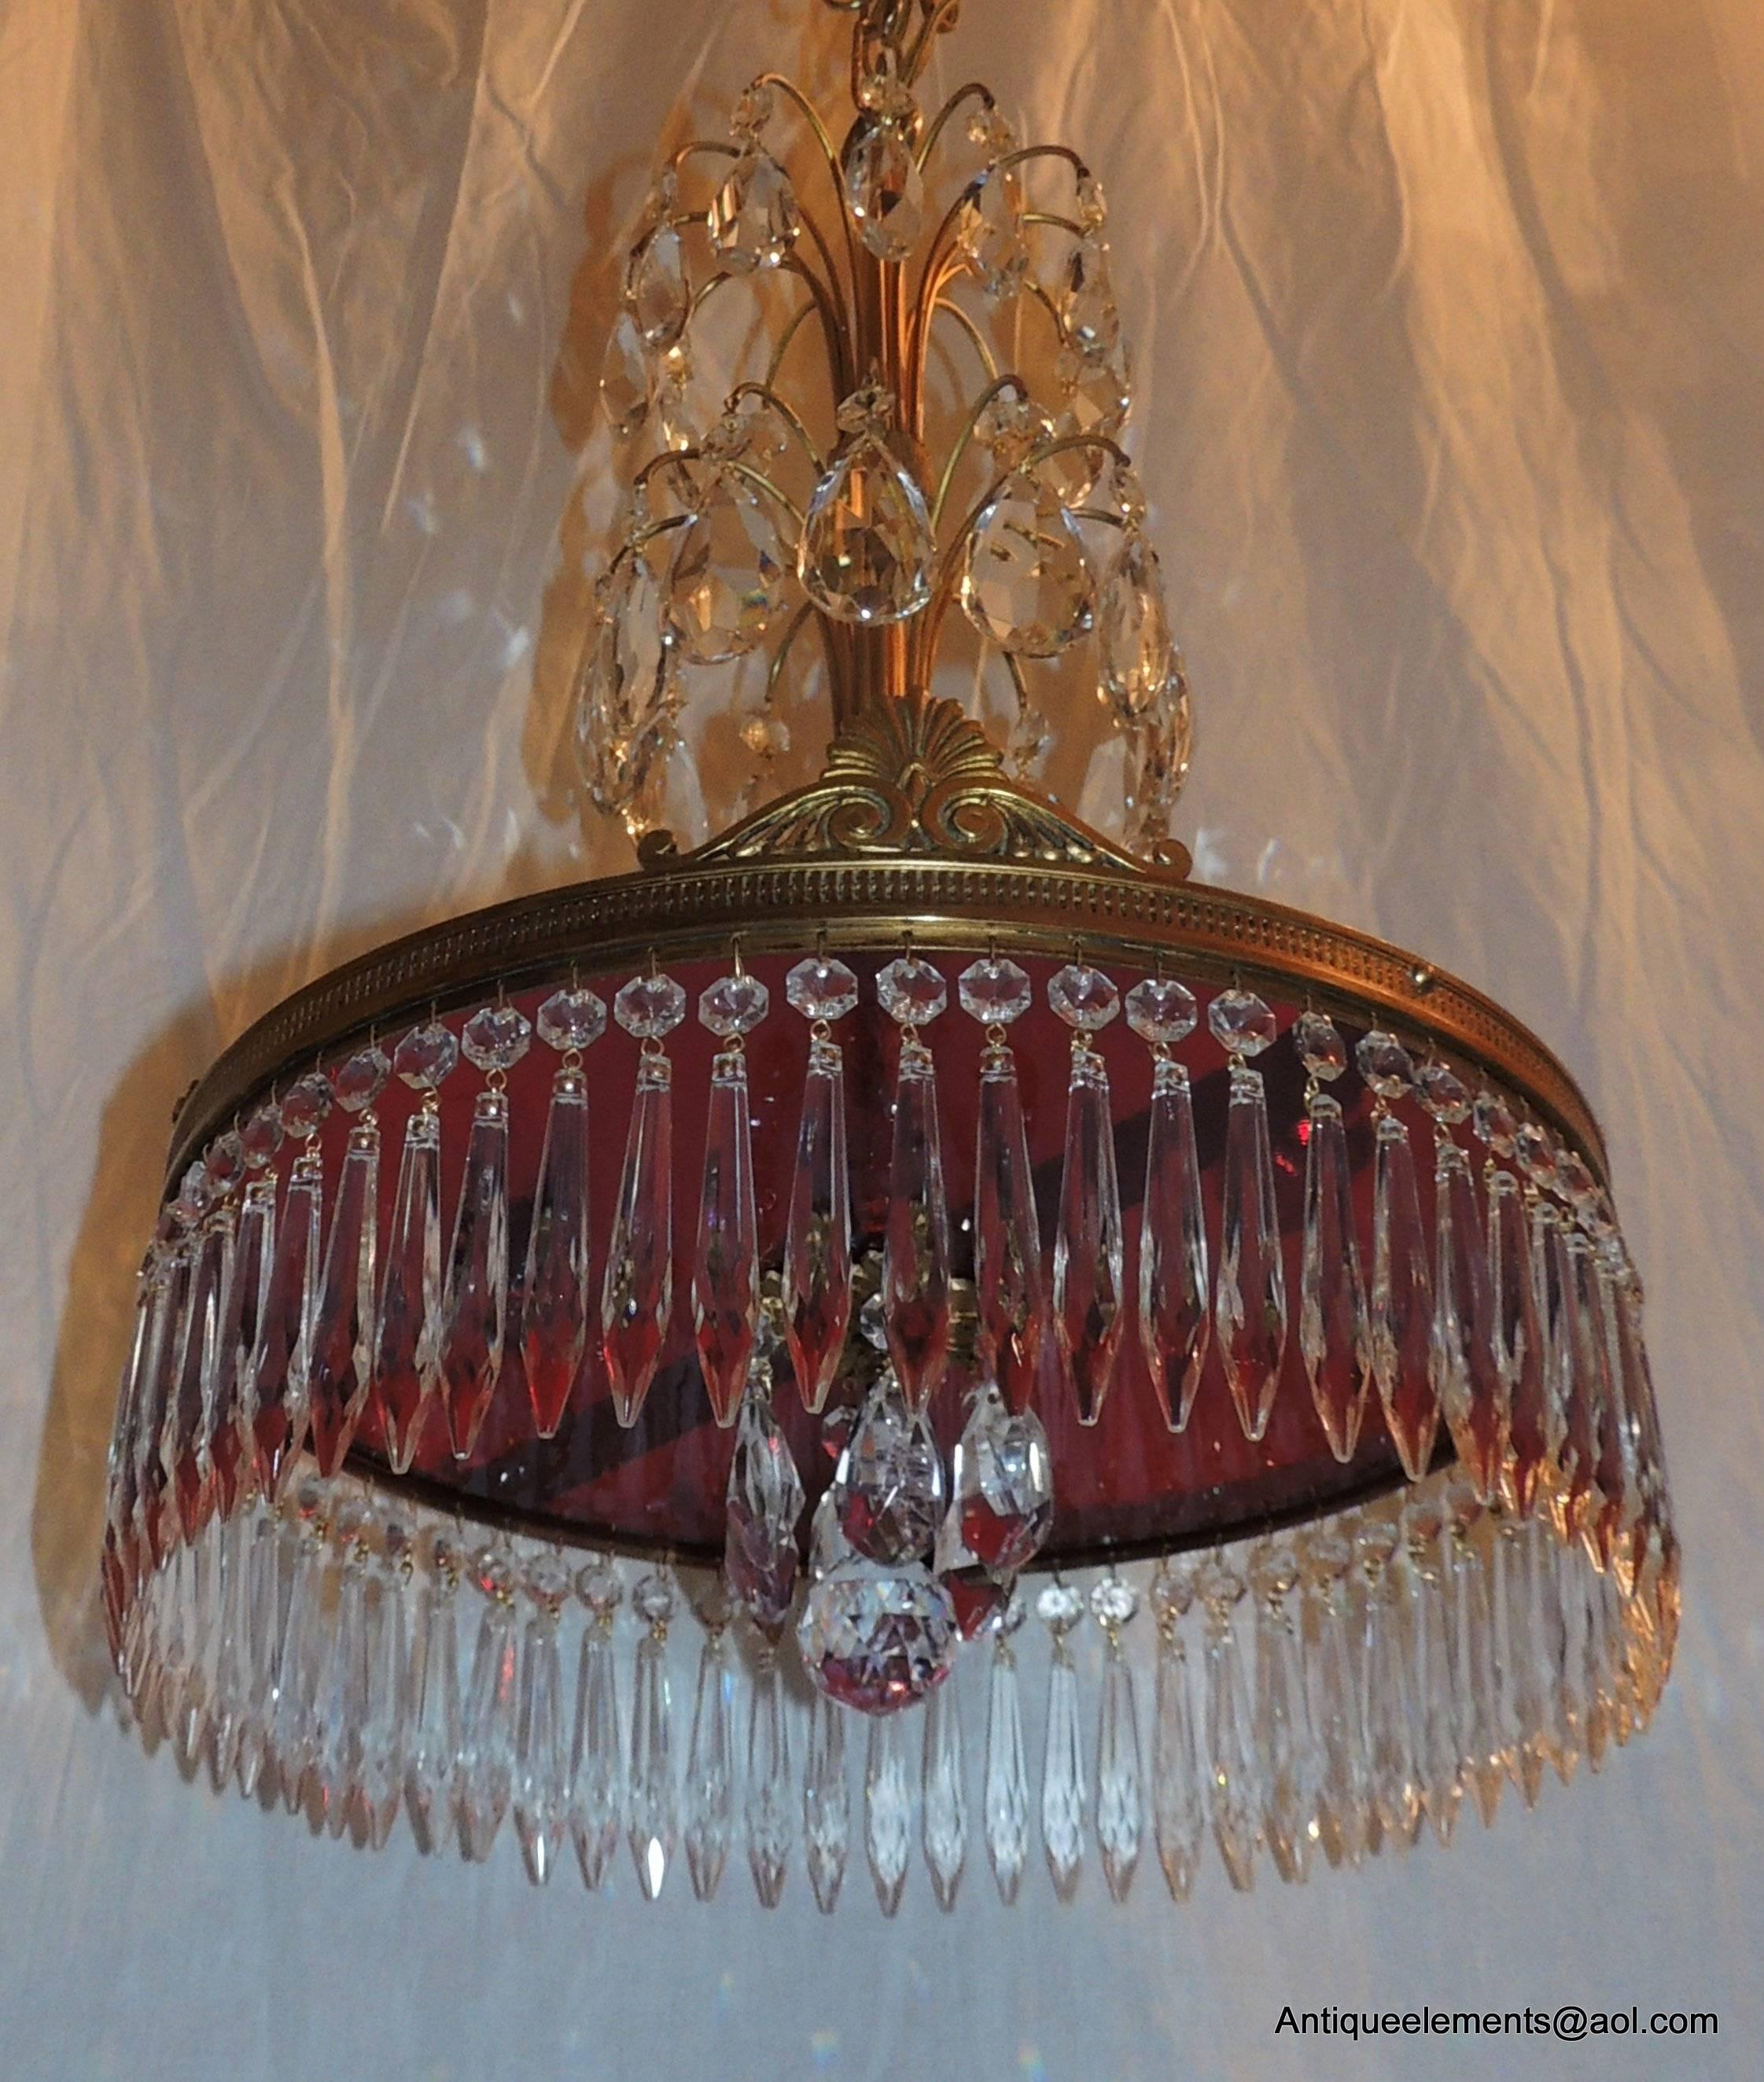 Wonderful French Baltic doré bronze chandelier with two top layers of crystal prism drops and wonderful red crystal under plate surrounded with beautiful crystal spears and drops. Surrounding the bronze trim are beautiful etched details and four fan